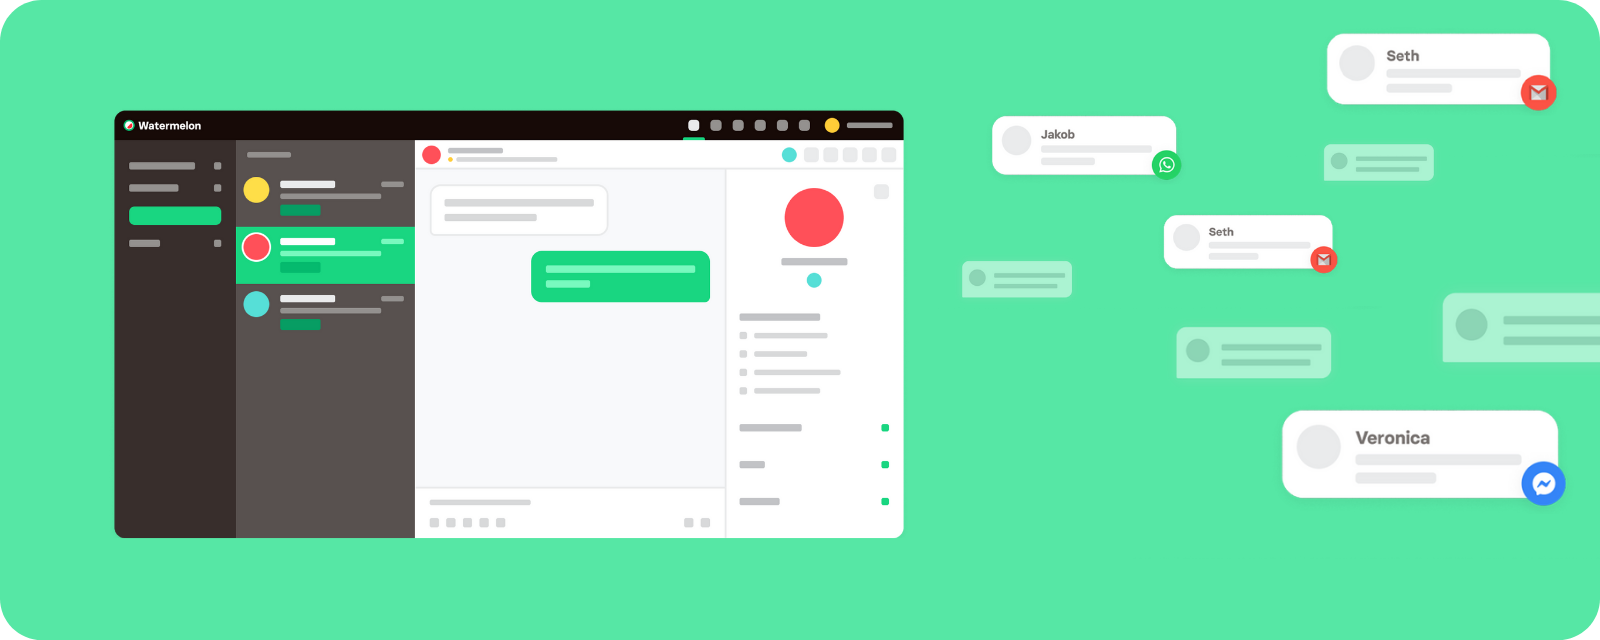 Centralize your conversations within Watermelon